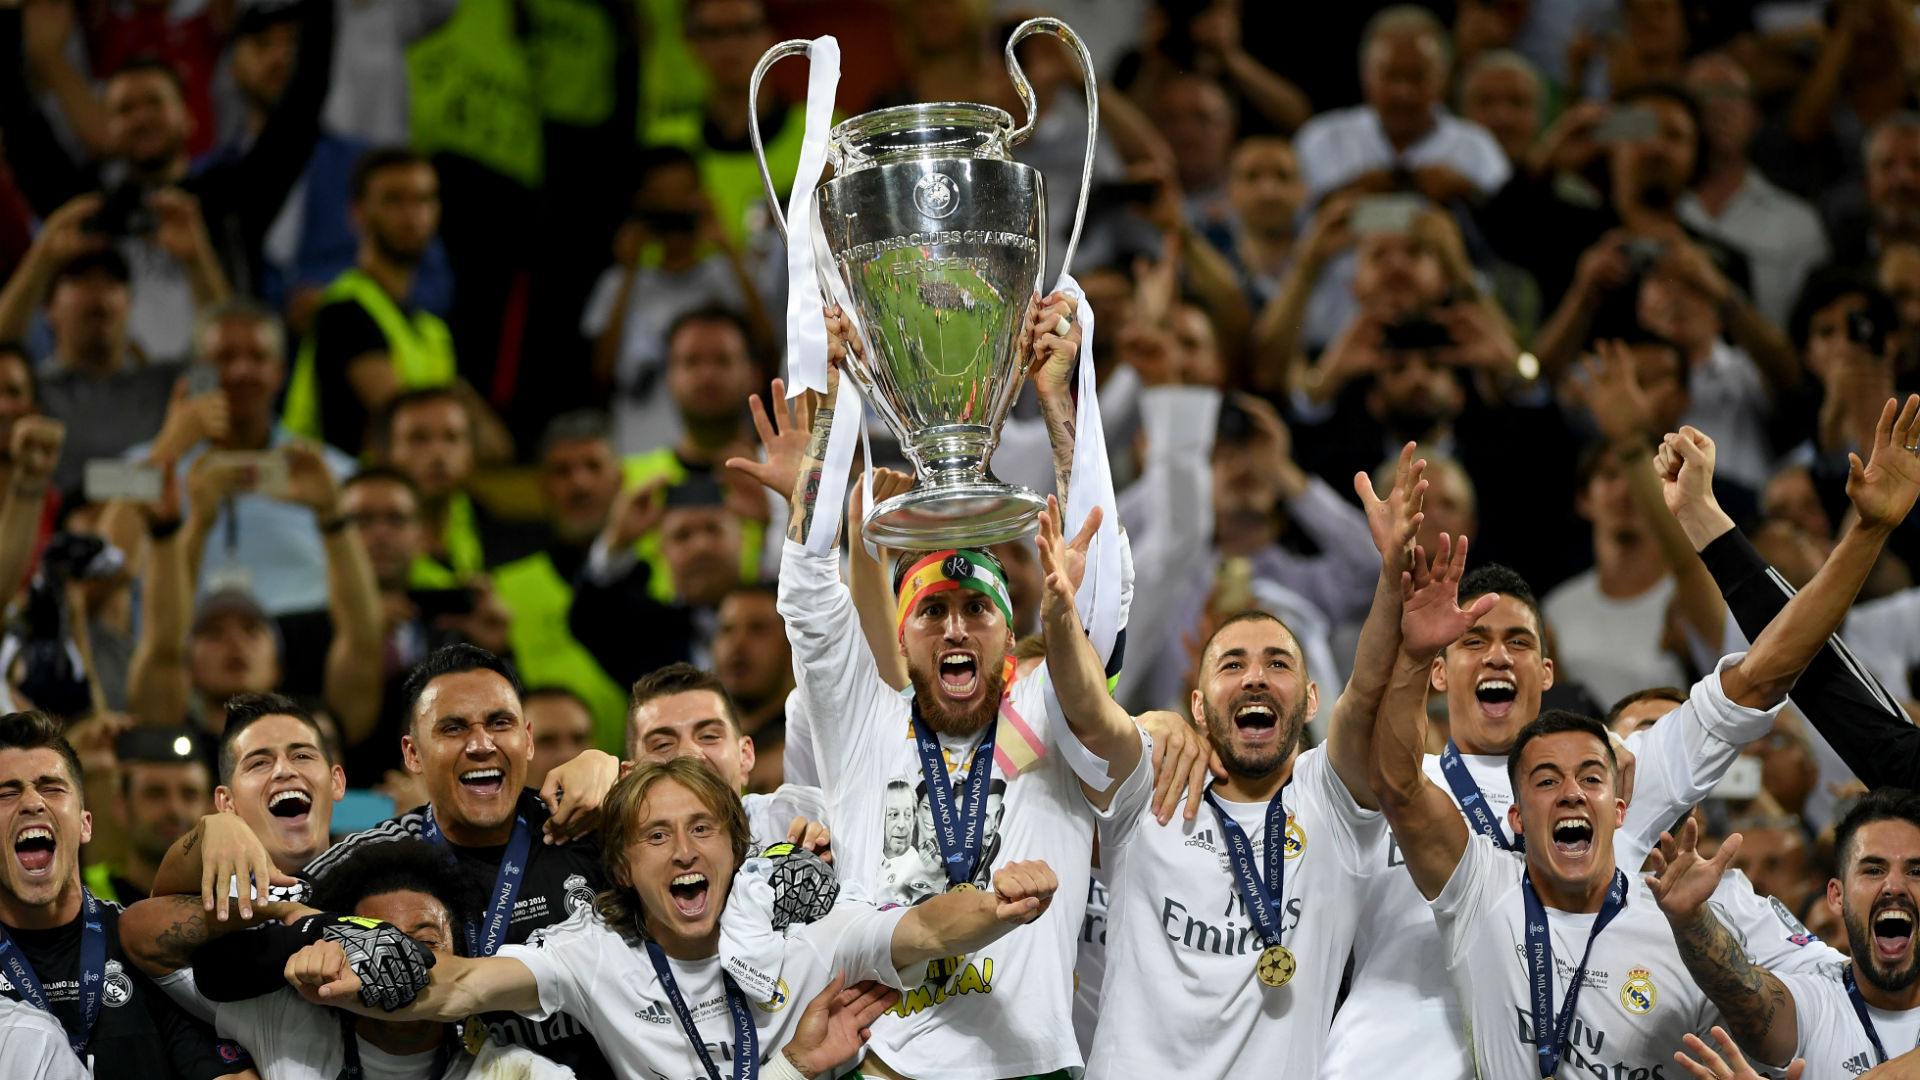 MLS All-Star Game: Real Madrid wins on PKs after draw (VIDEO